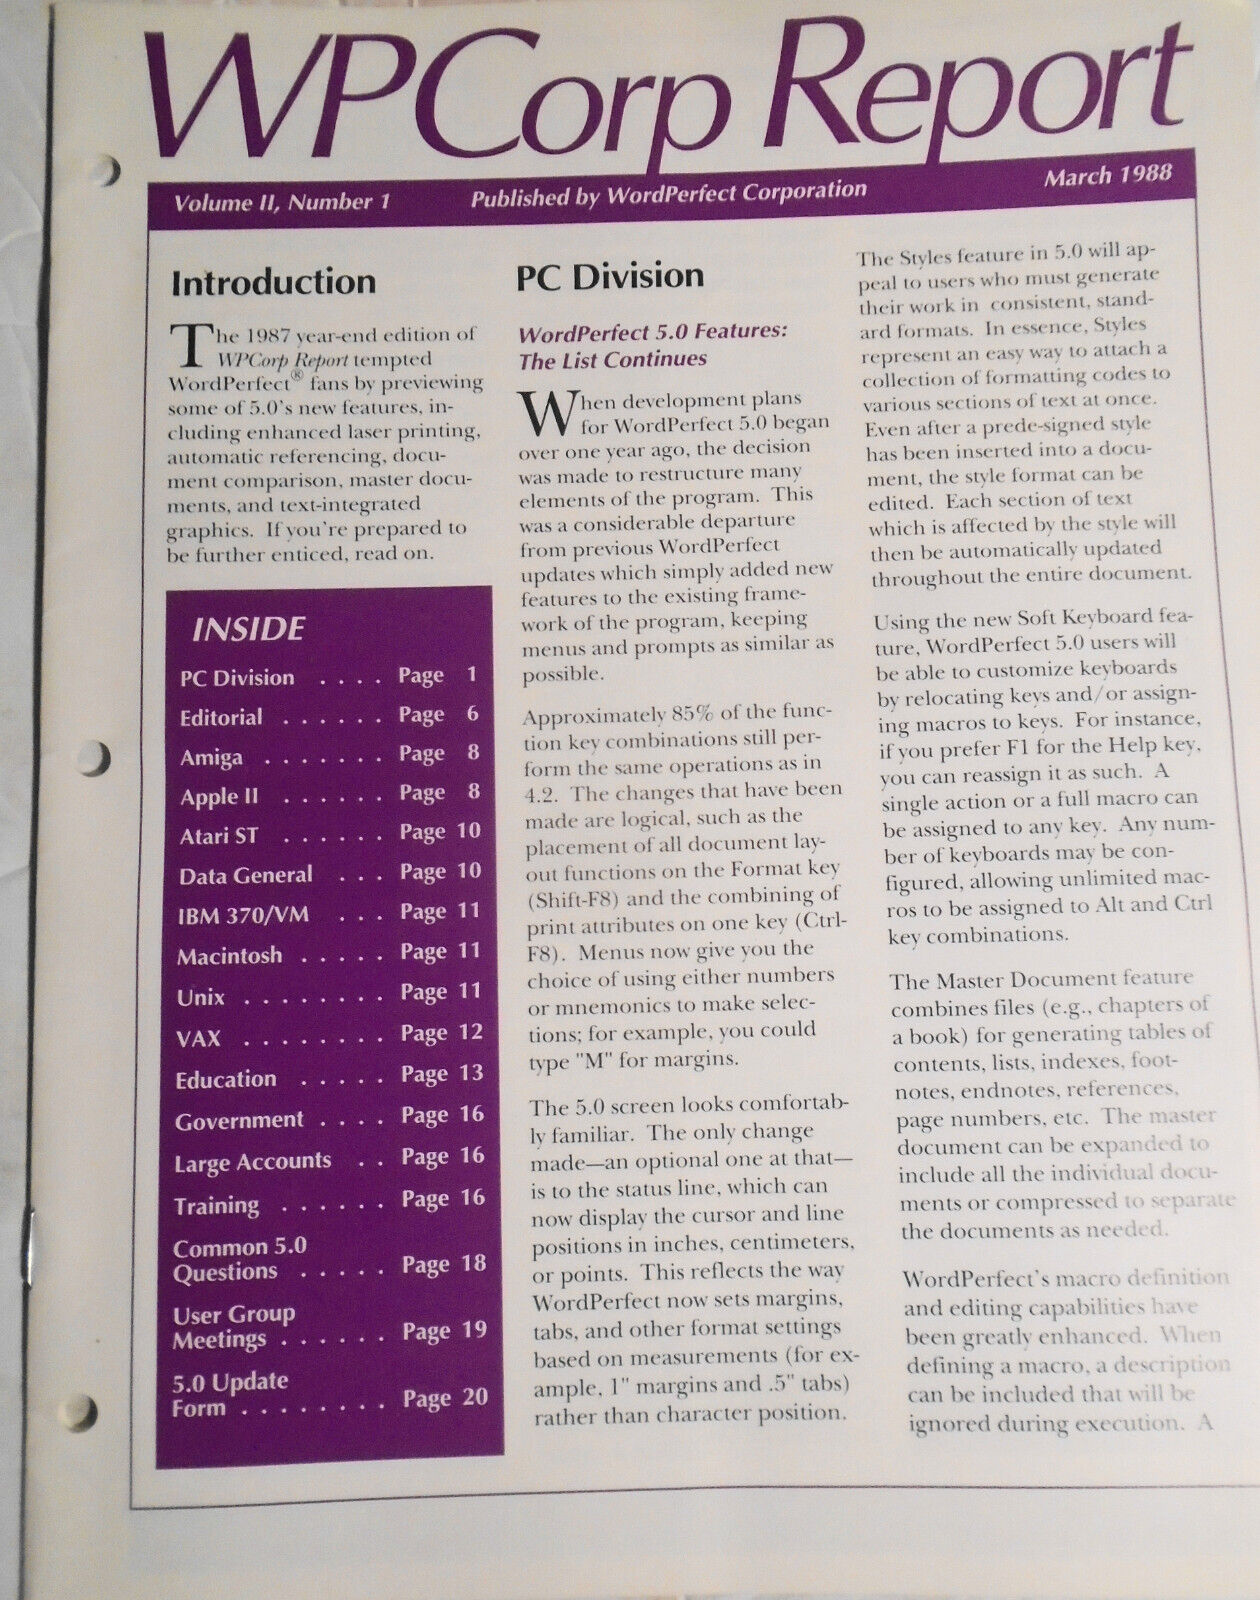 WPCorp Report, March 1988, WordPerfect Corporation